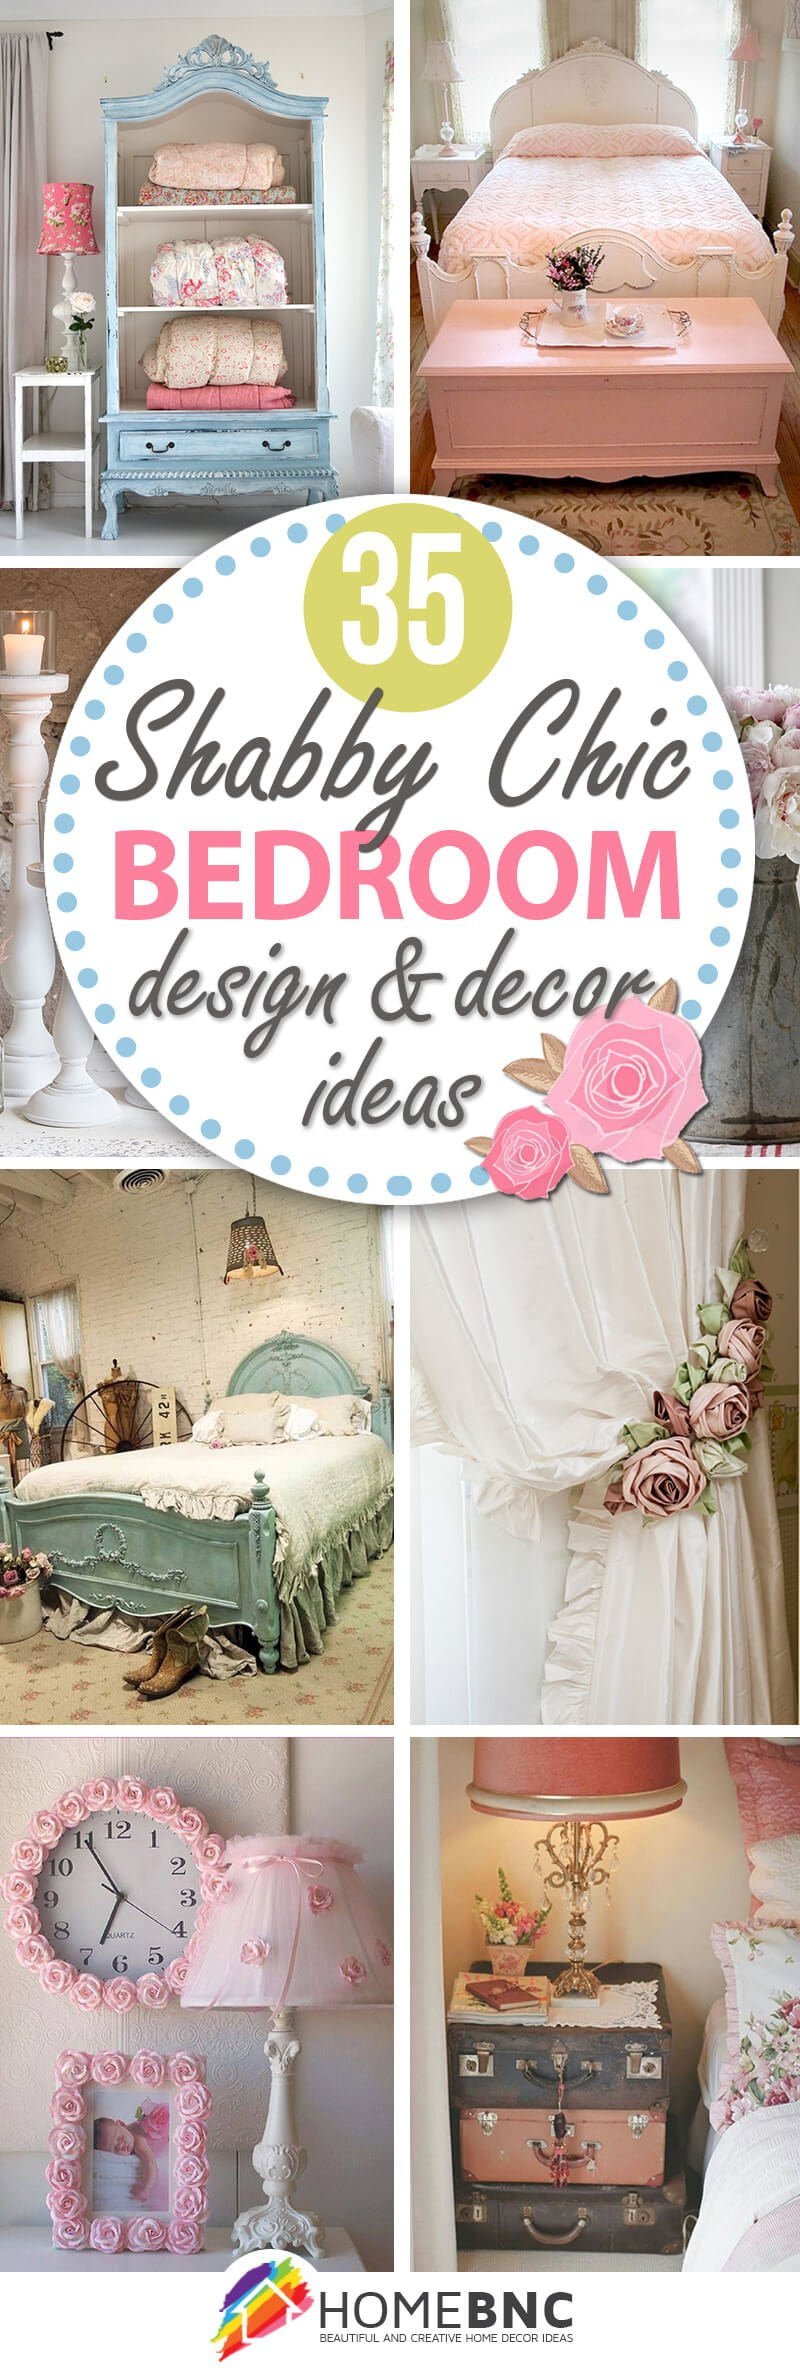 35 Best Shabby Chic Bedroom Design And Decor Ideas For 2021 - Modern Chic Home Decor Ideas